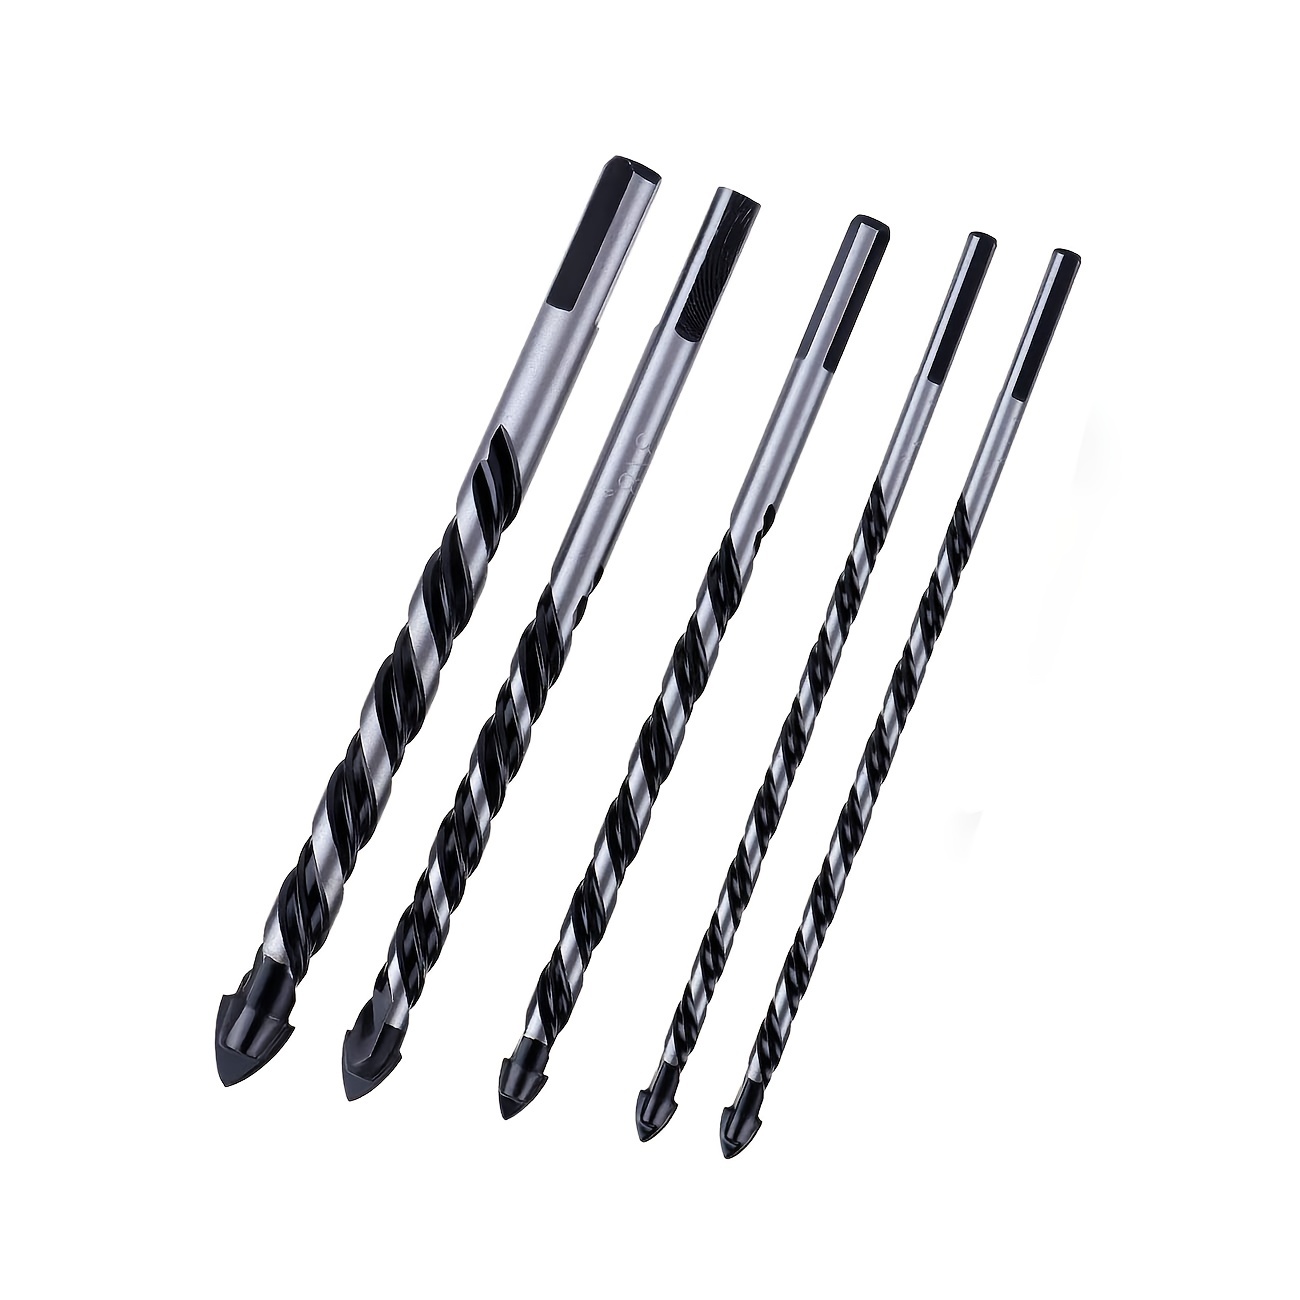 Set of 5Pcs Round Head Center Punch-Imperial Standard/Hard Metal